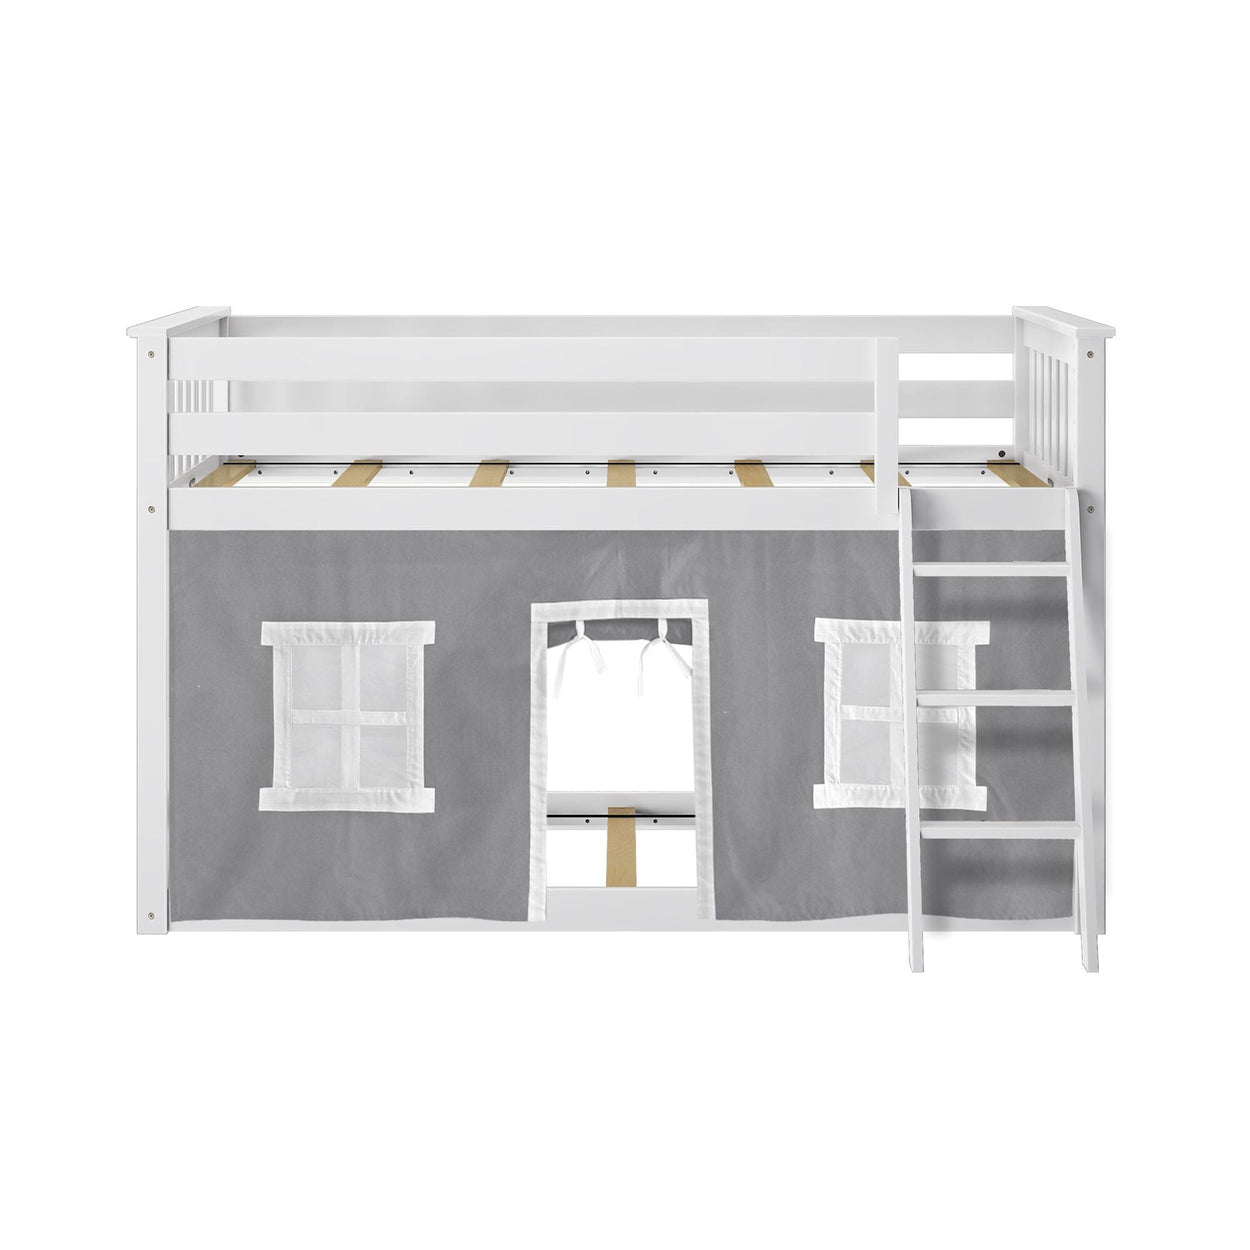 Bunk Beds Max & Lily Twin-Size Low Bunk Bed + Curtain 